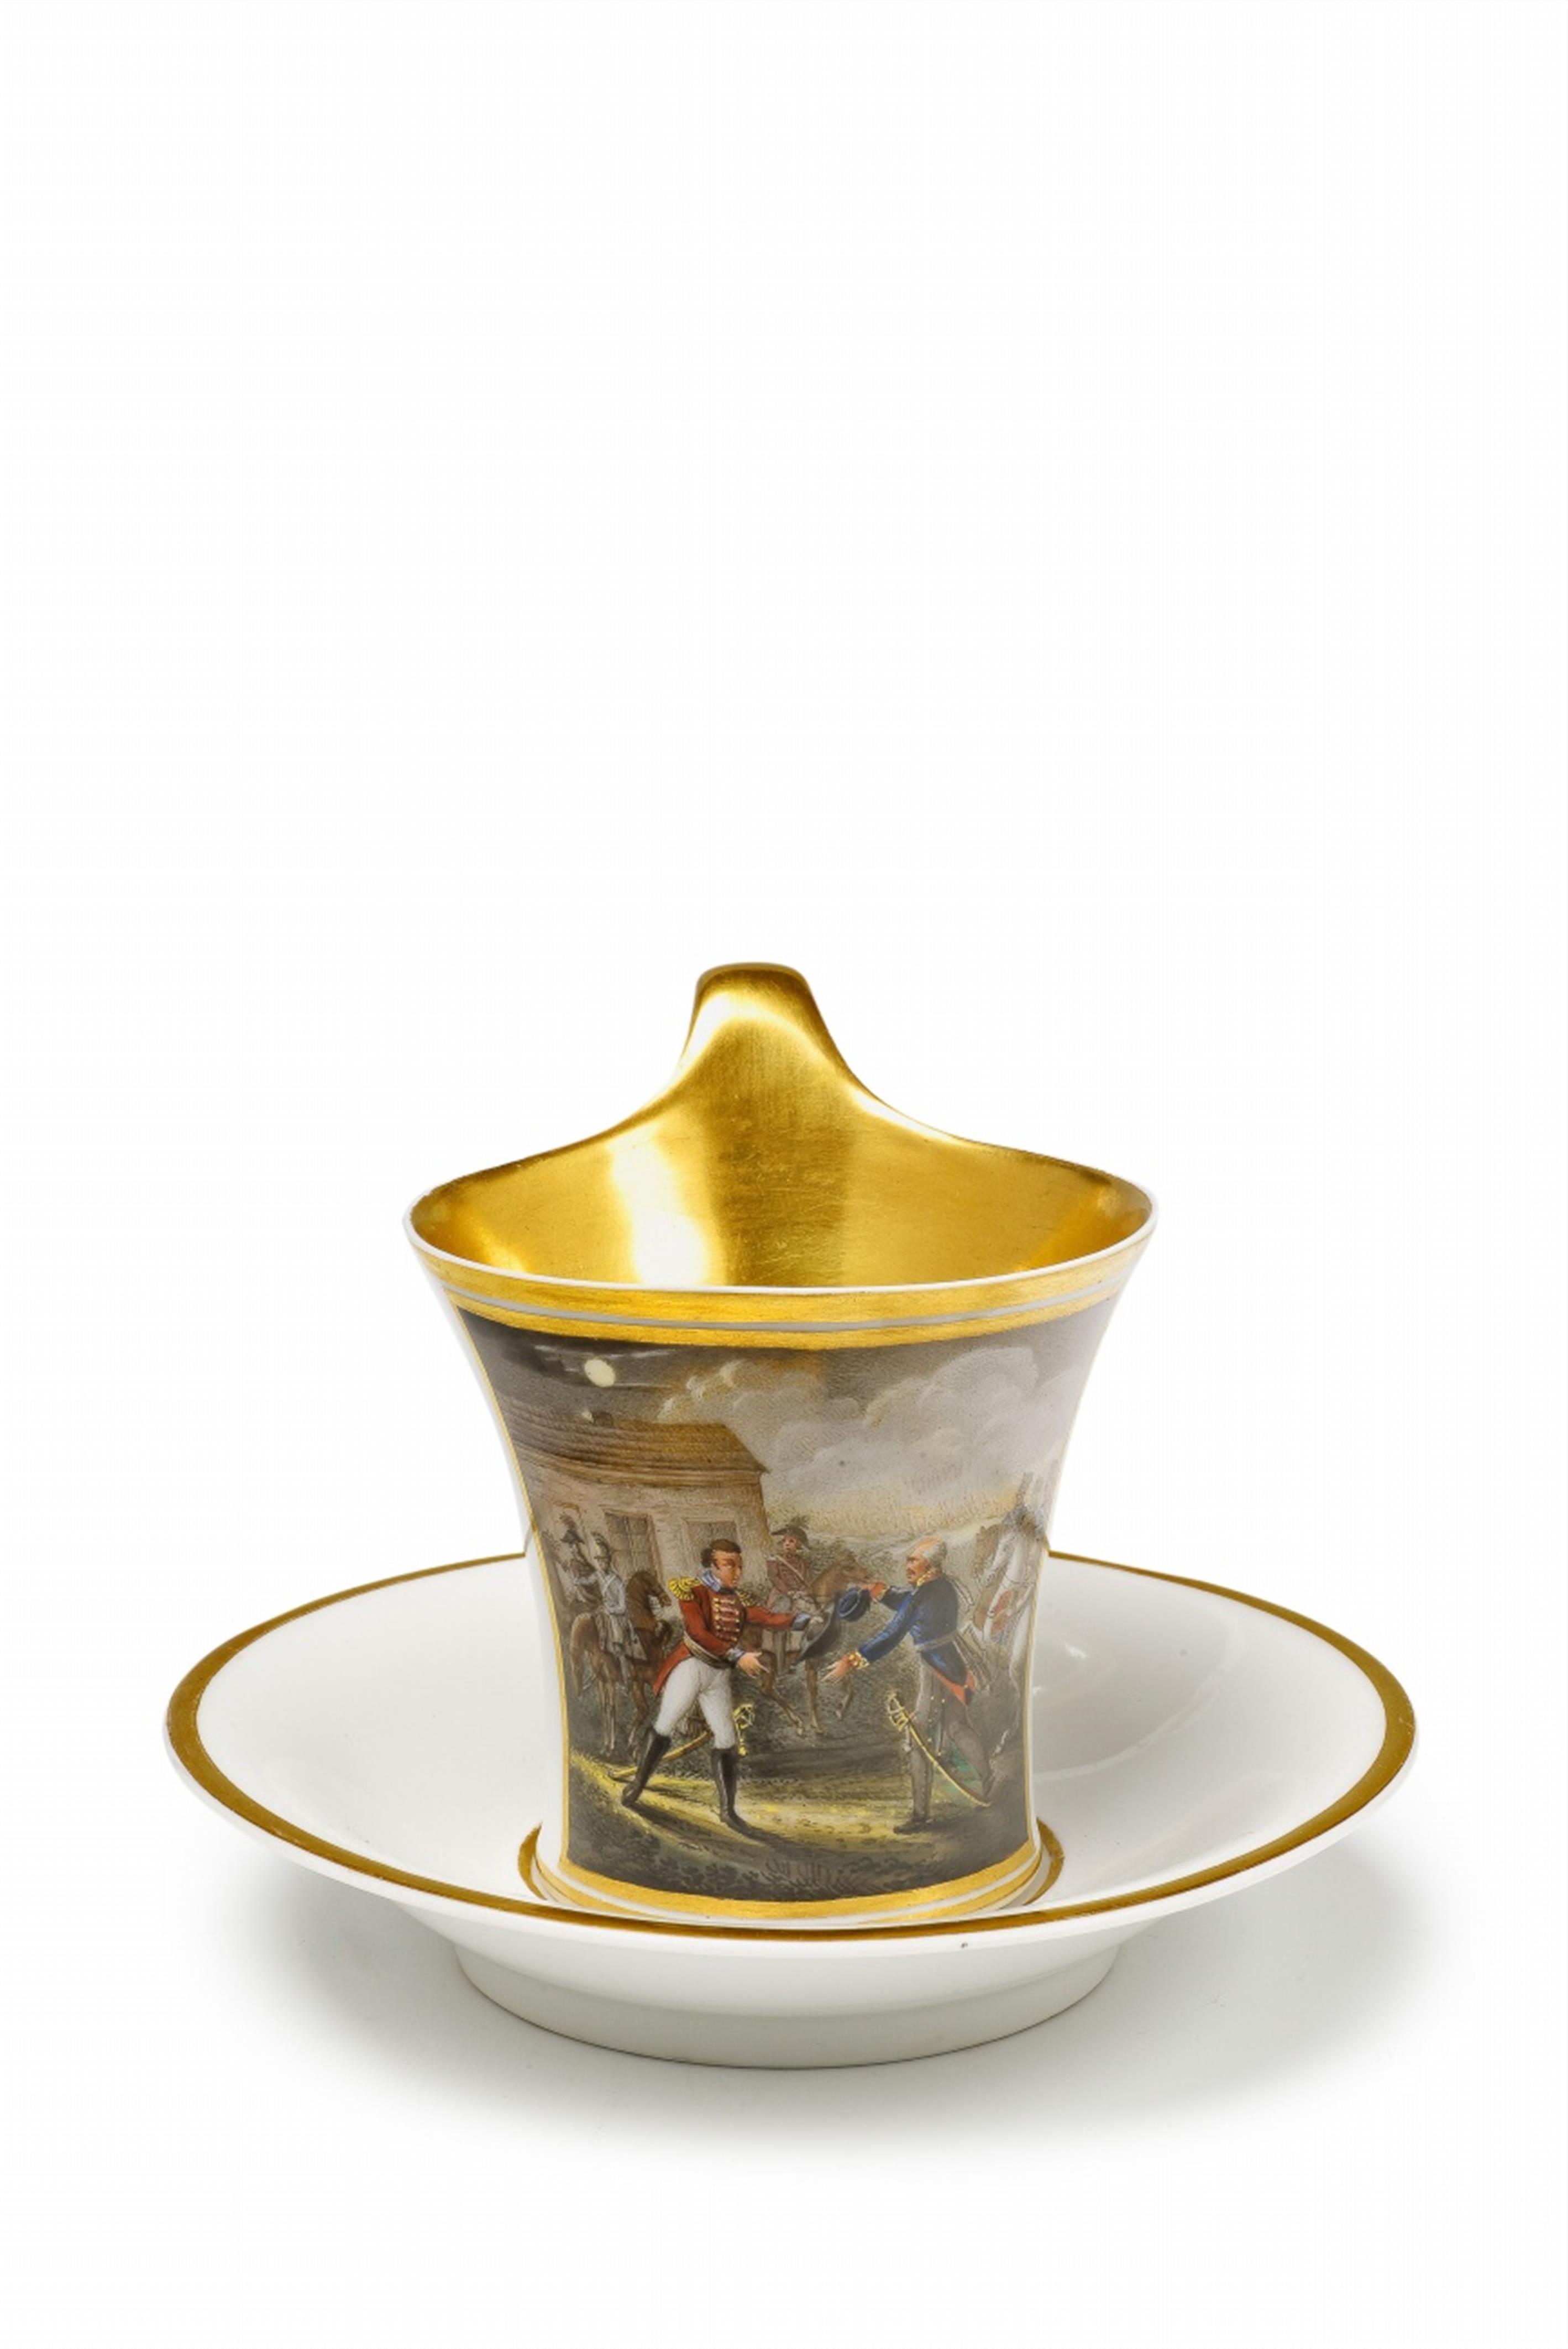 A Berlin KPM porcelain cup with a scene from the life of the Duke of Wellington - image-1